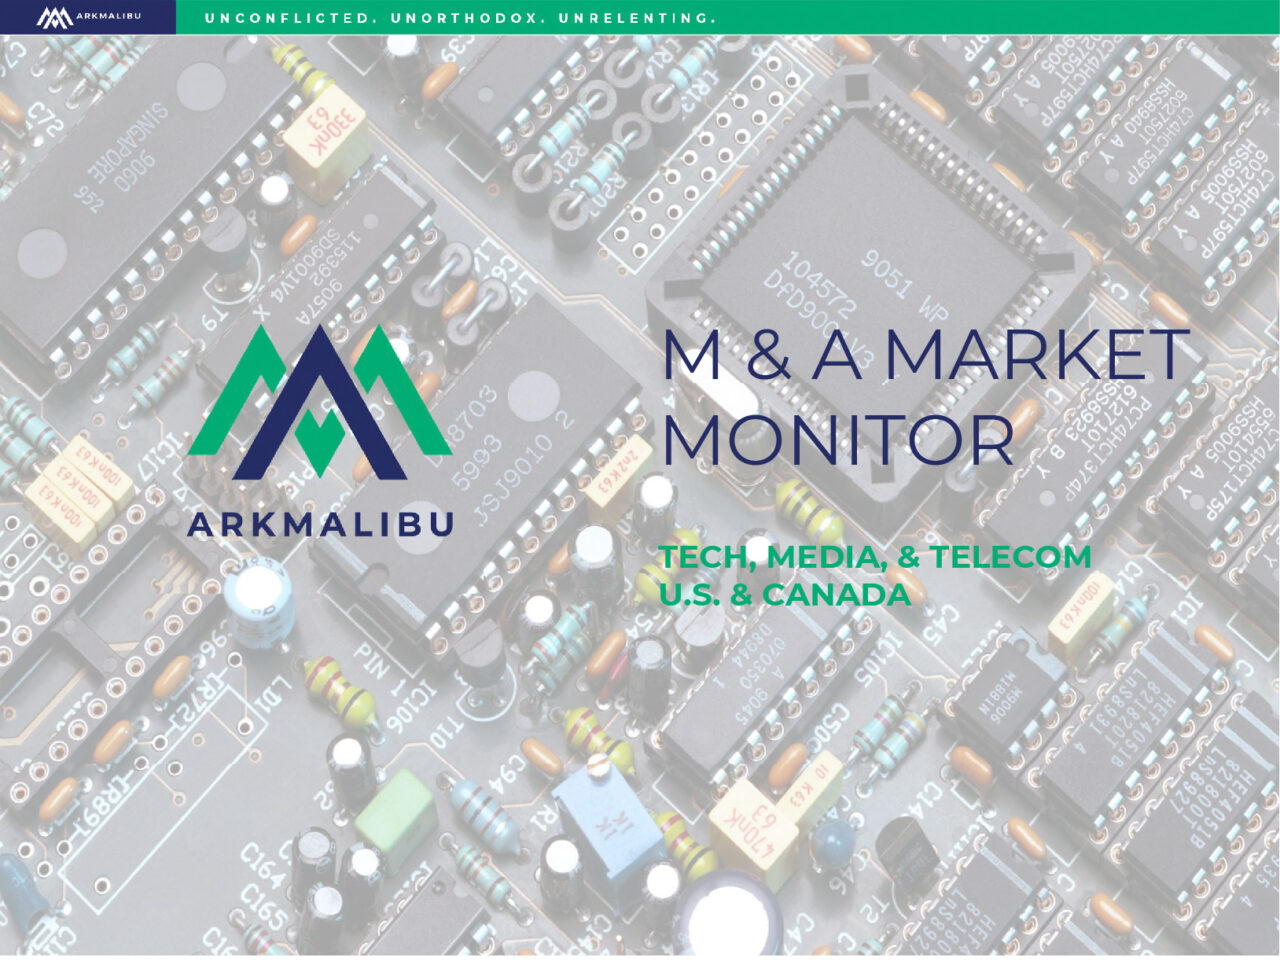 Market Monitor Cover for Tech, Media & Telecom. Faded Image of a circuit board in the background